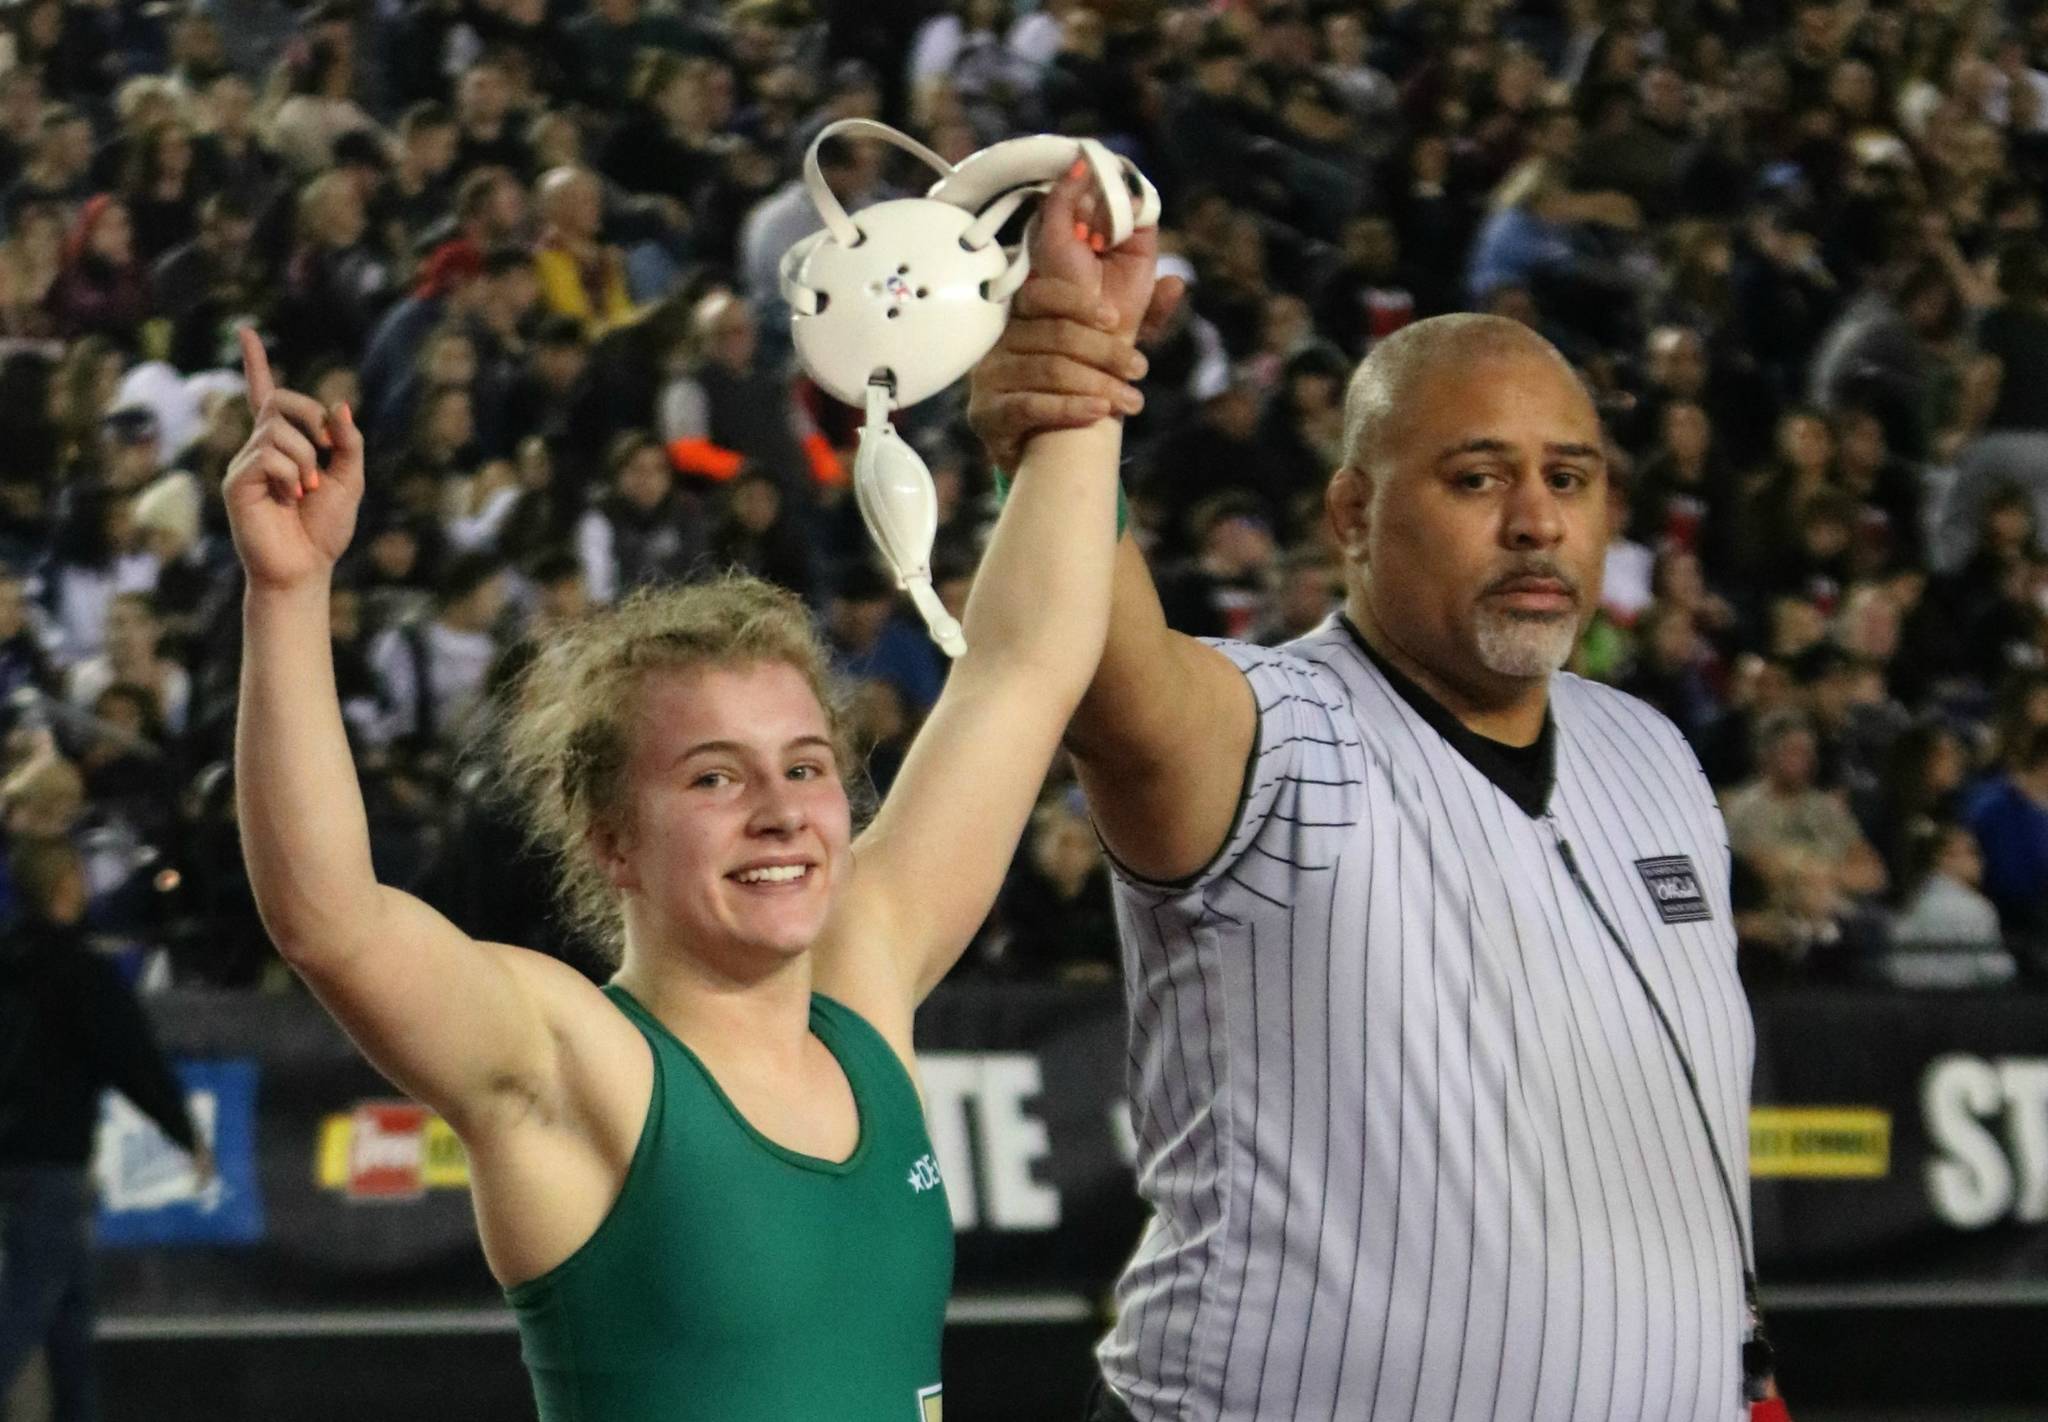 Finally a state first for Redmond’s Williams